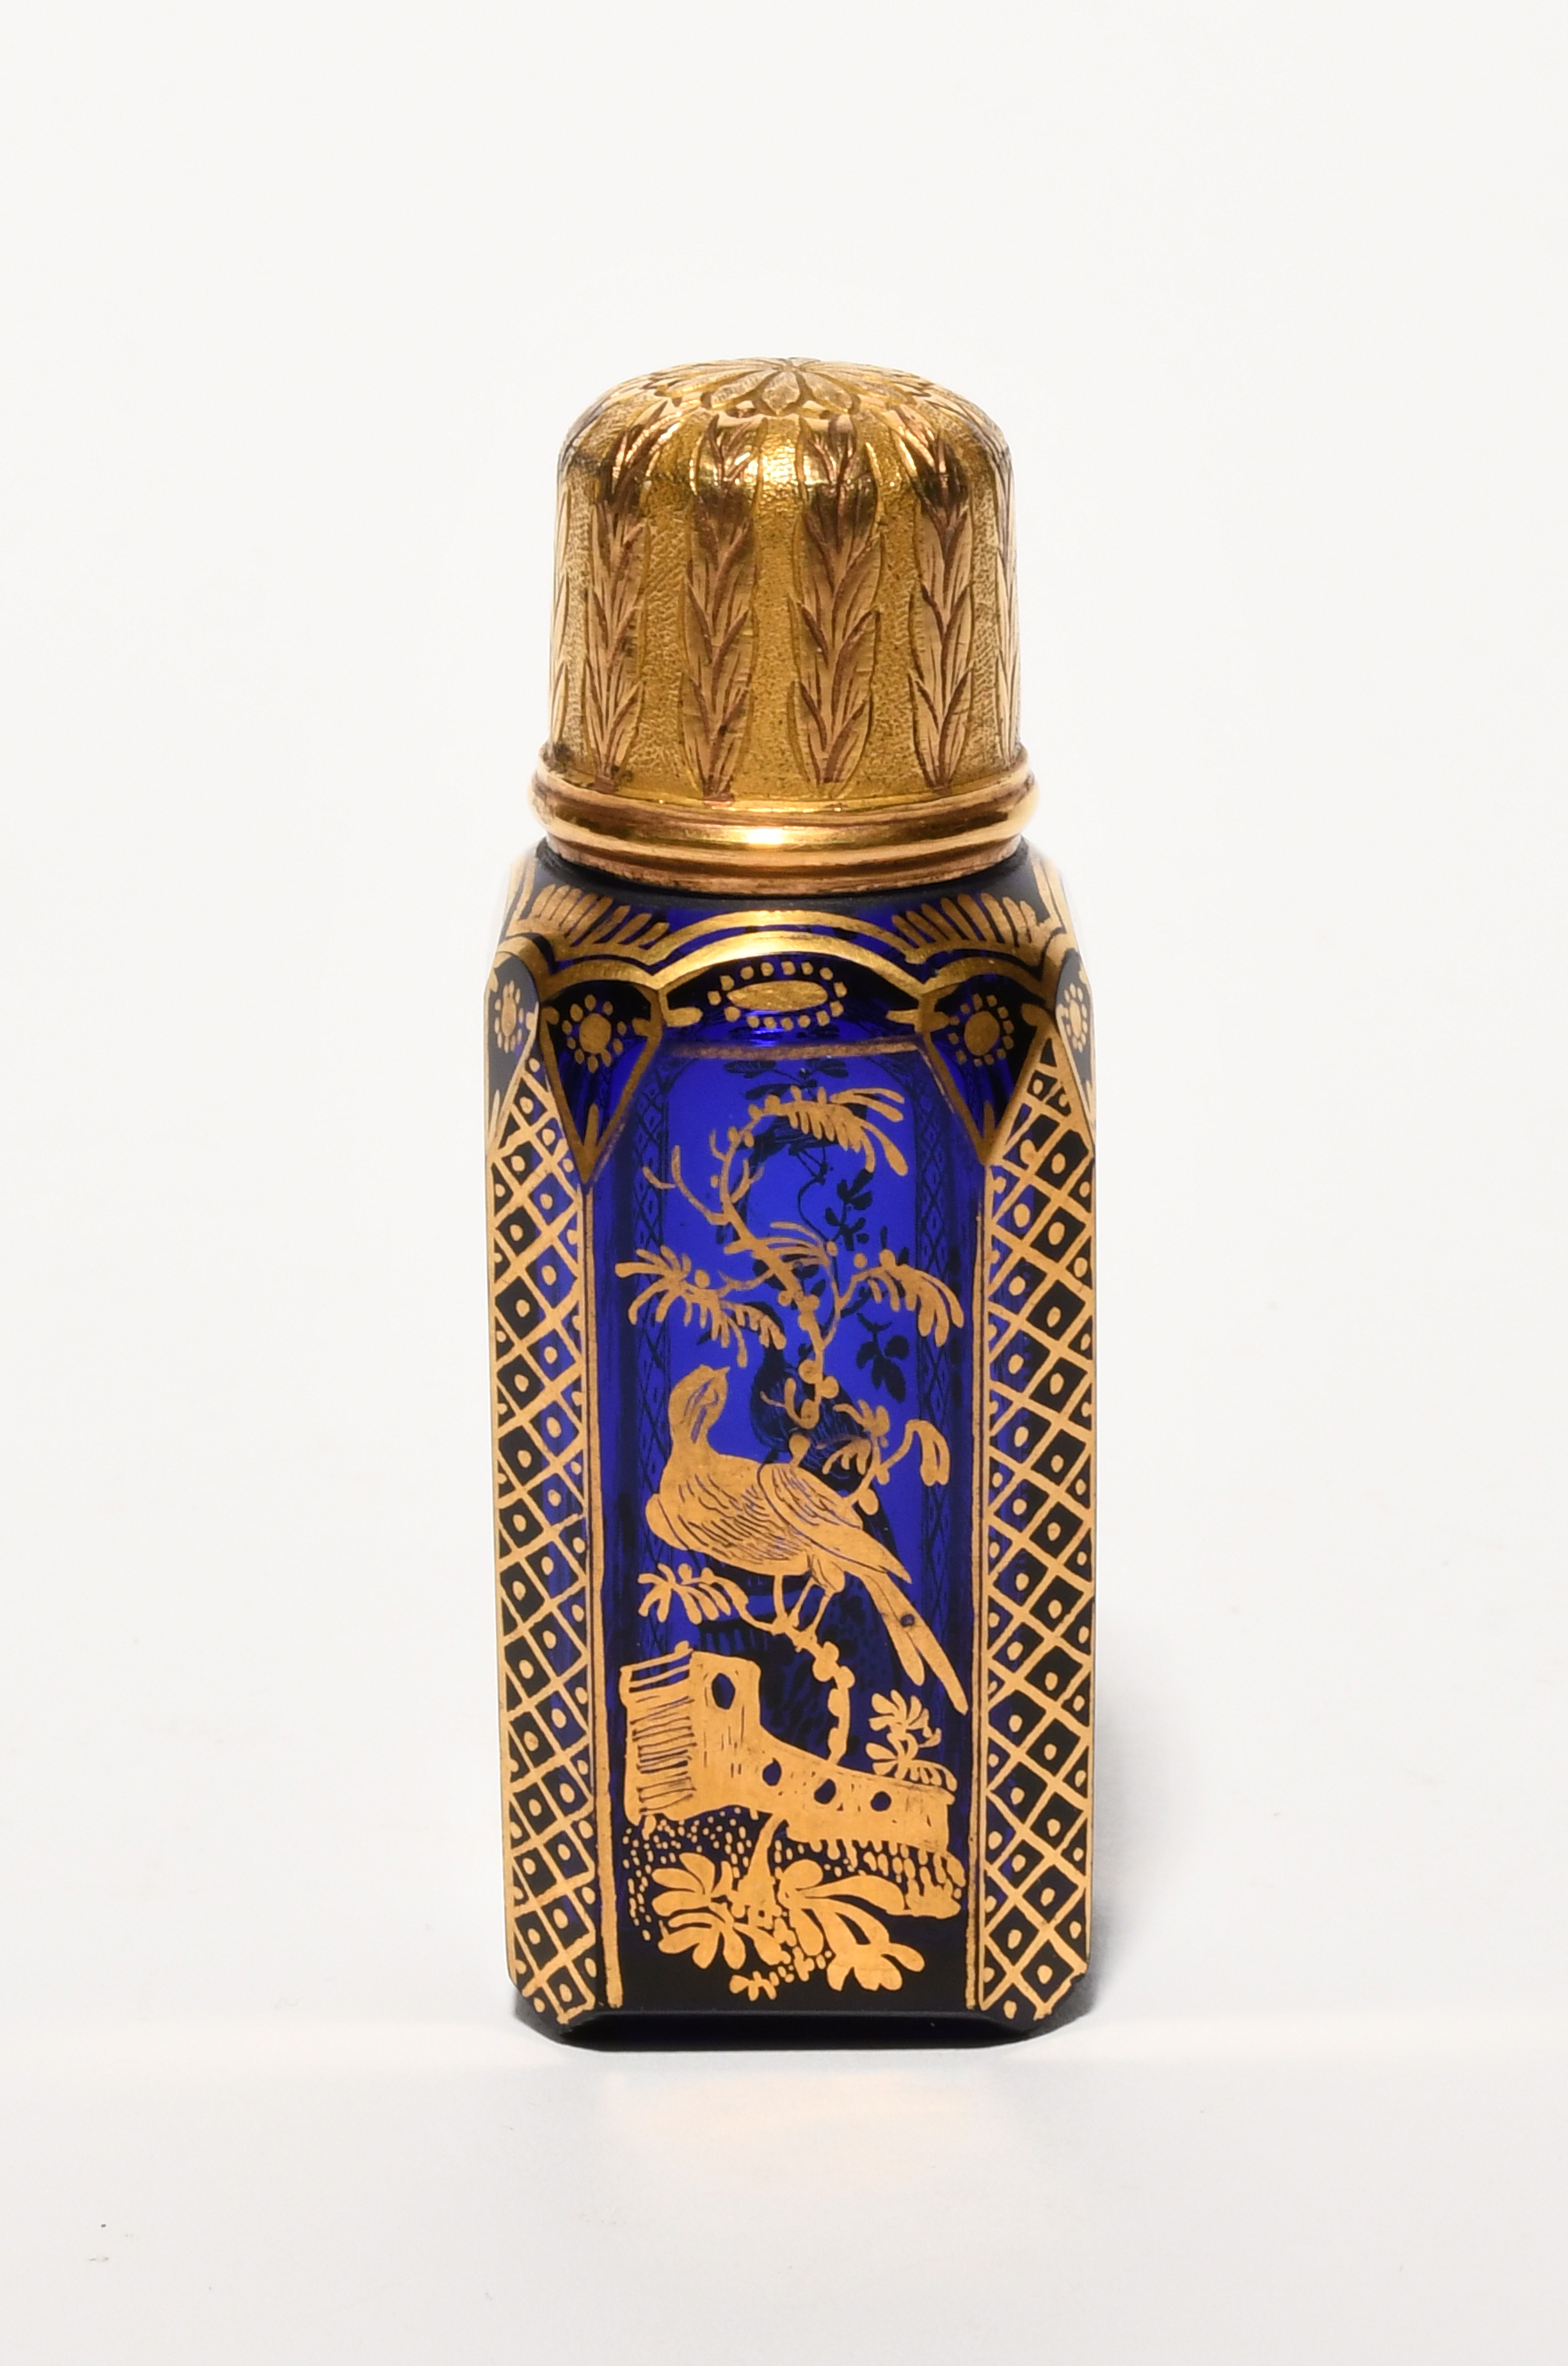 A glass scent bottle decorated in the workshop of James Giles, c.1770, the rich blue glass of - Image 2 of 2